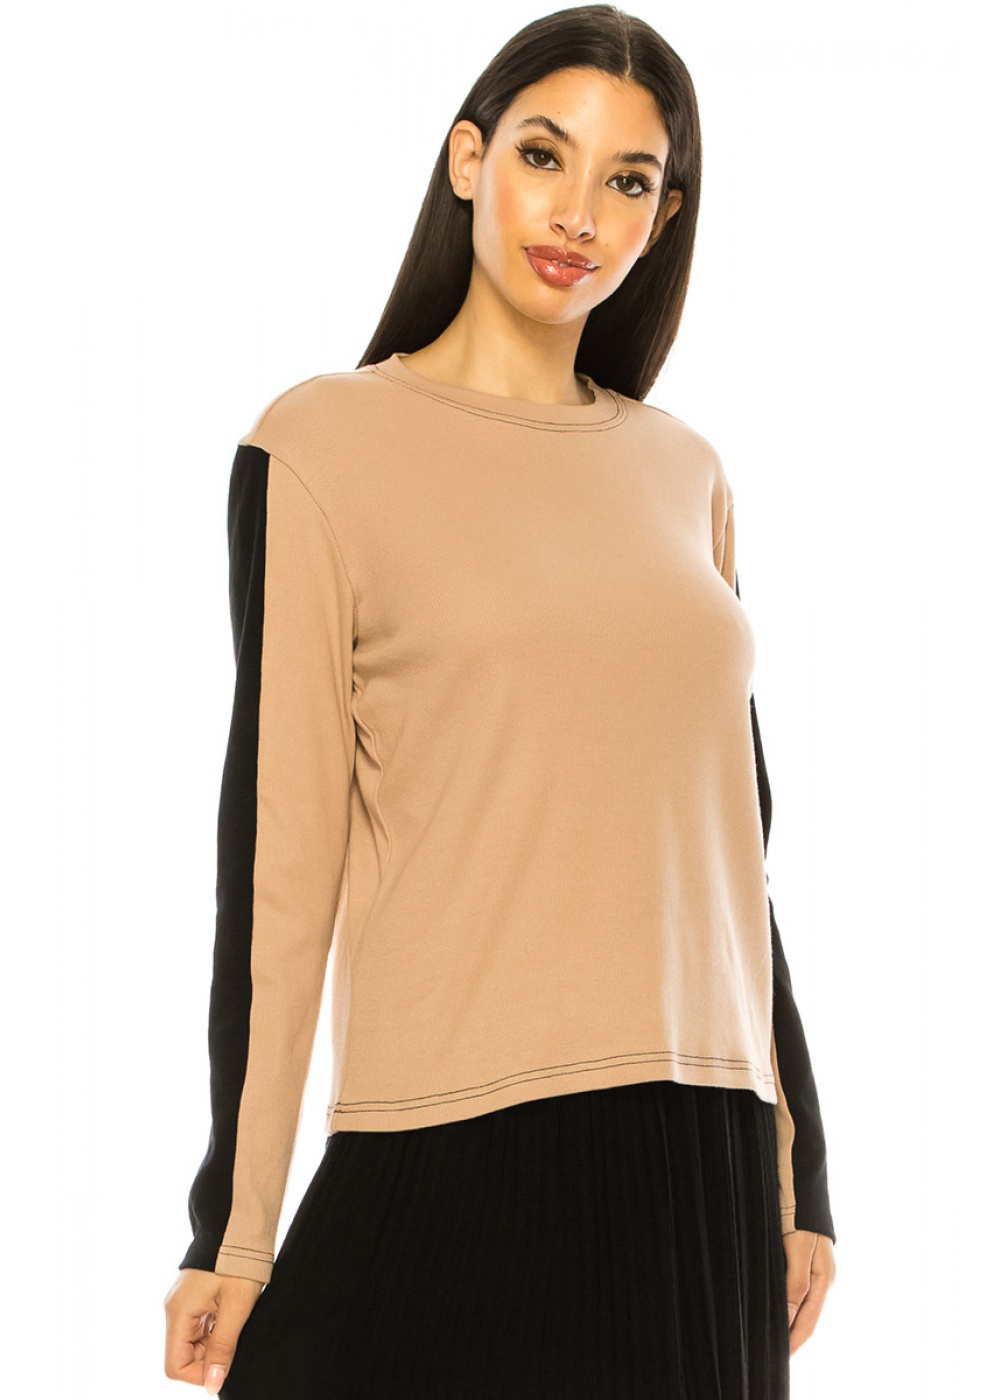 Classic Camel Long Sleeve T-Shirt With Black Stripe Accents